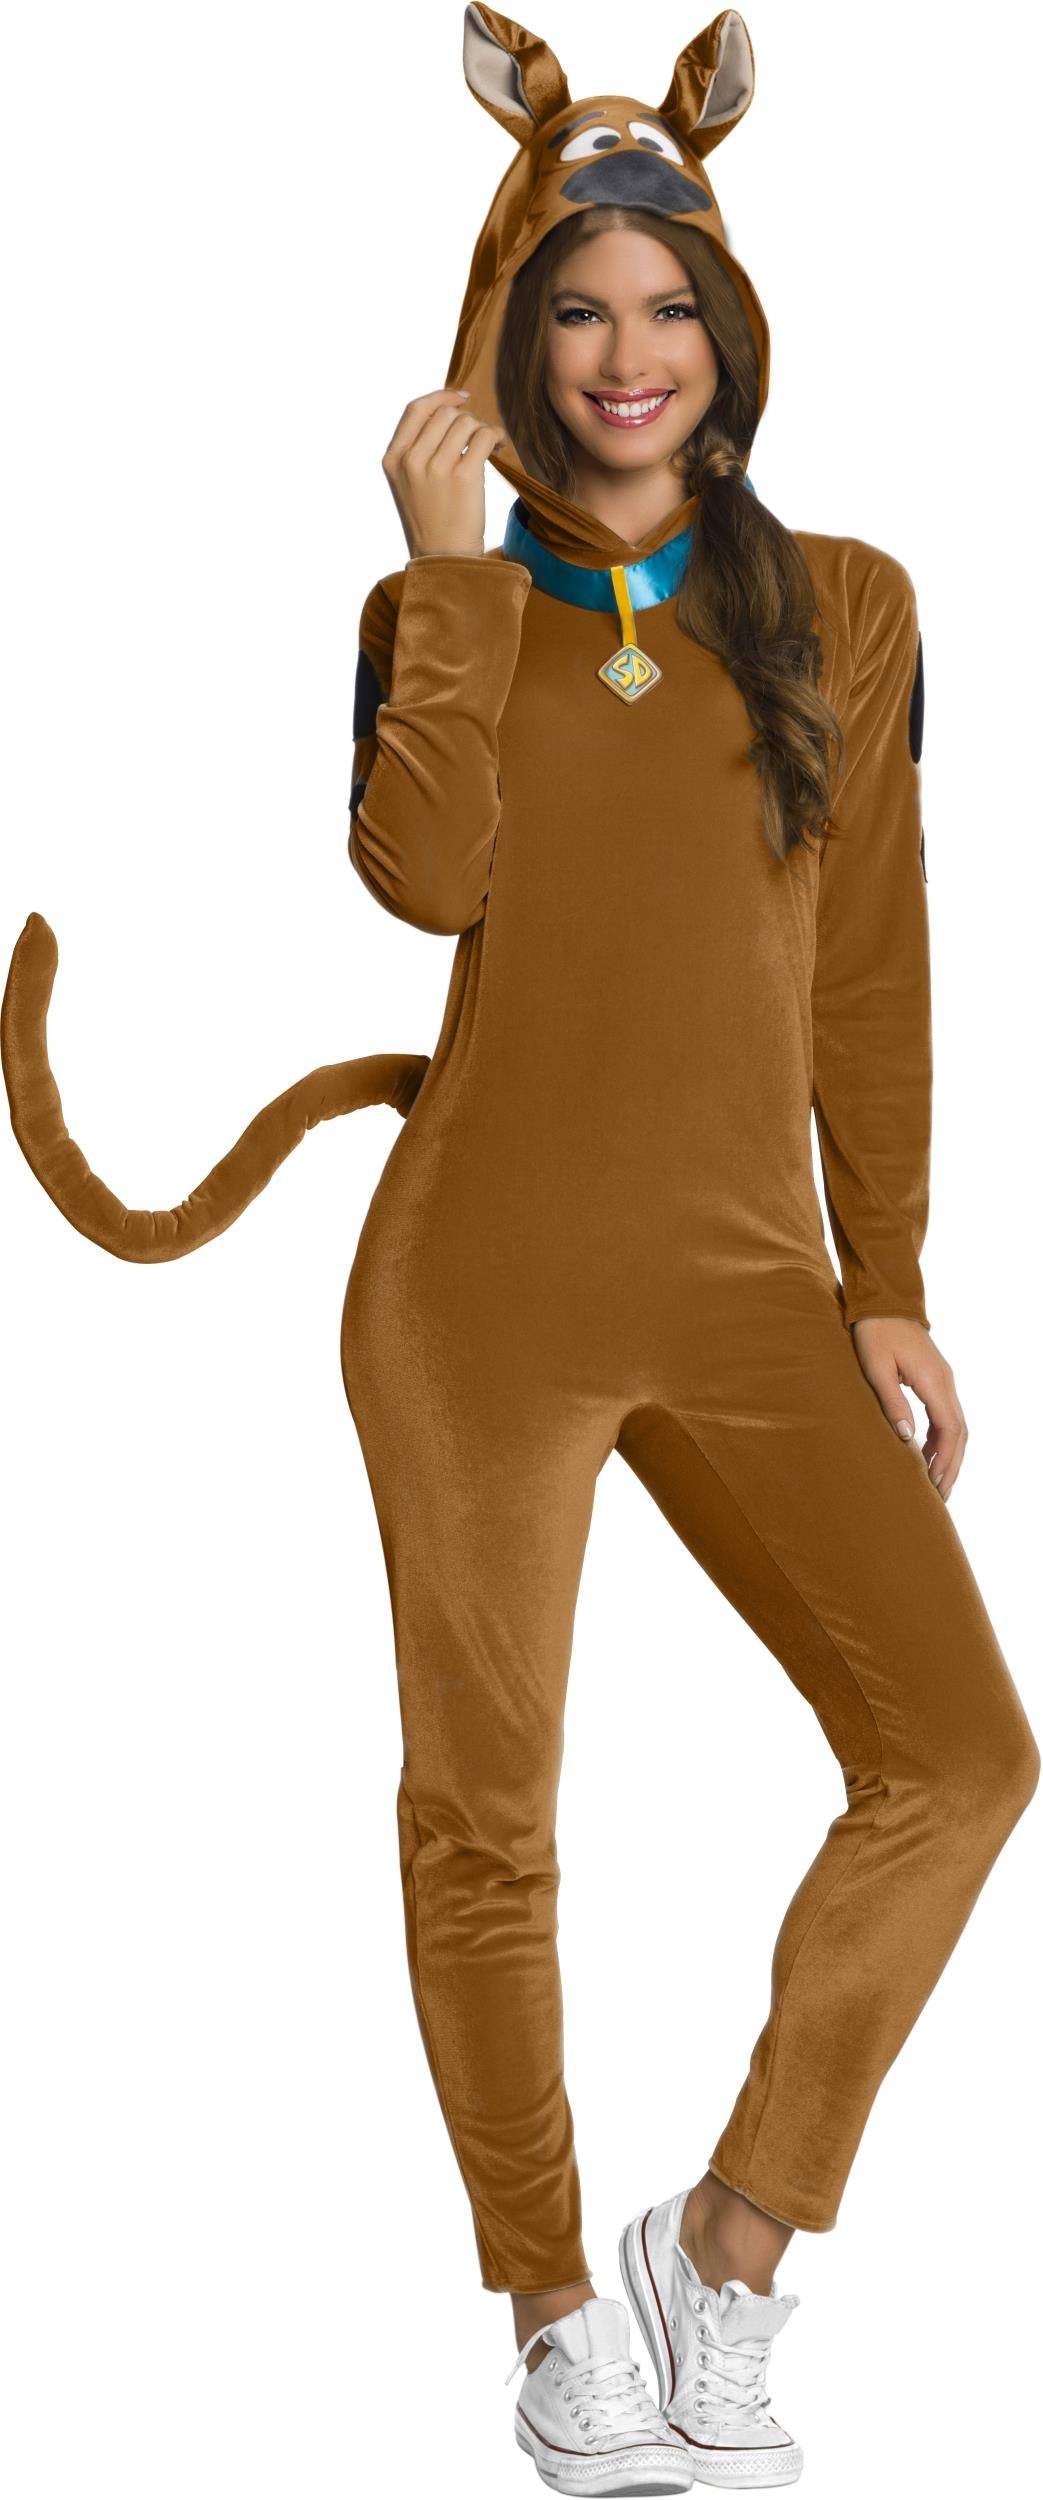 Scooby Doo Adult Pajama Jumpsuit with Hood Costume Small